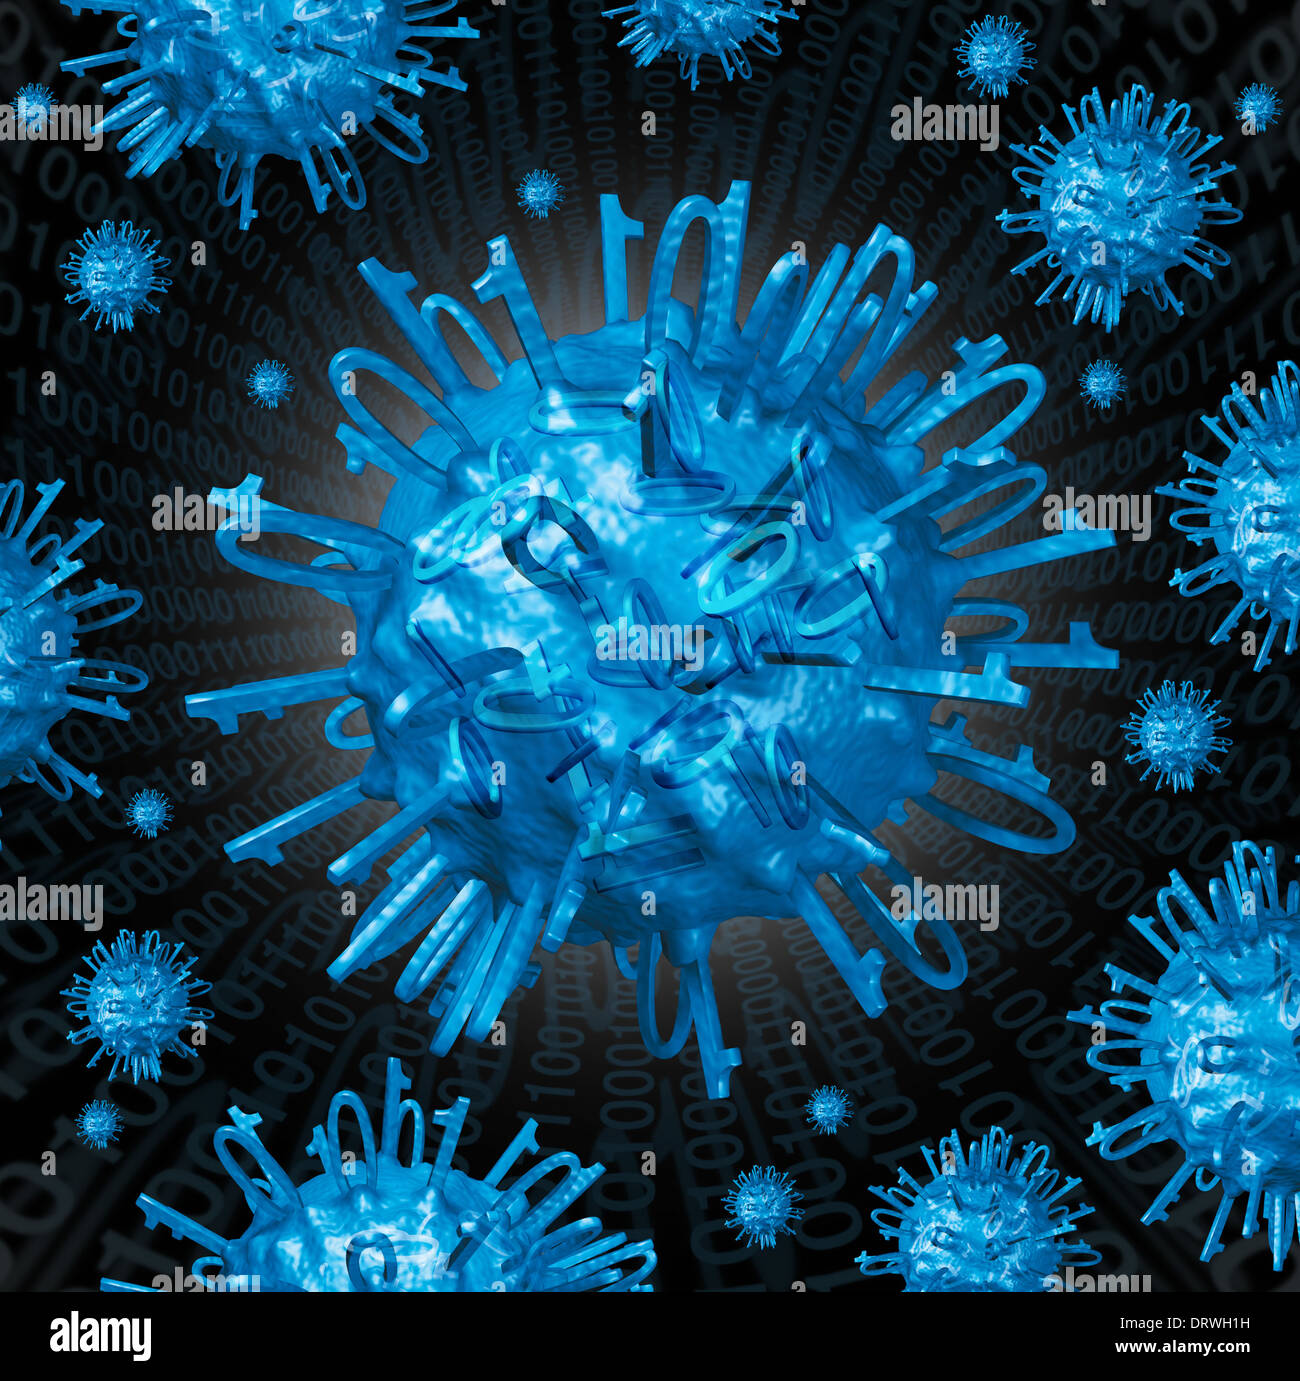 Viral marketing internet communication concept with a virus cell made of binary code with ones and zeros as a social media technology symbol for web buzz. Stock Photo